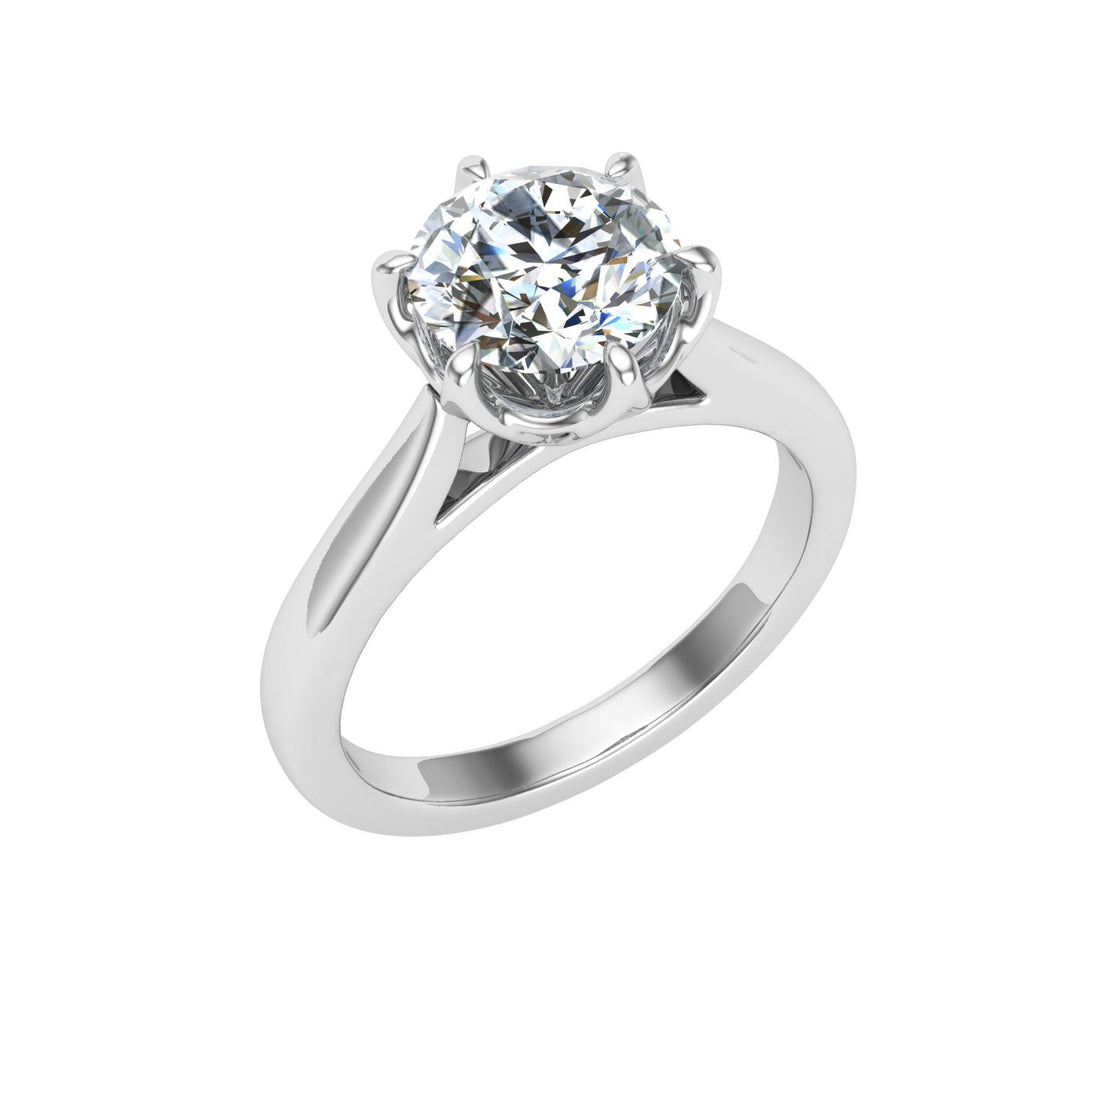 Adaya Round Cut Solitaire Moissanite Solitaire Engagement Ring White Gold